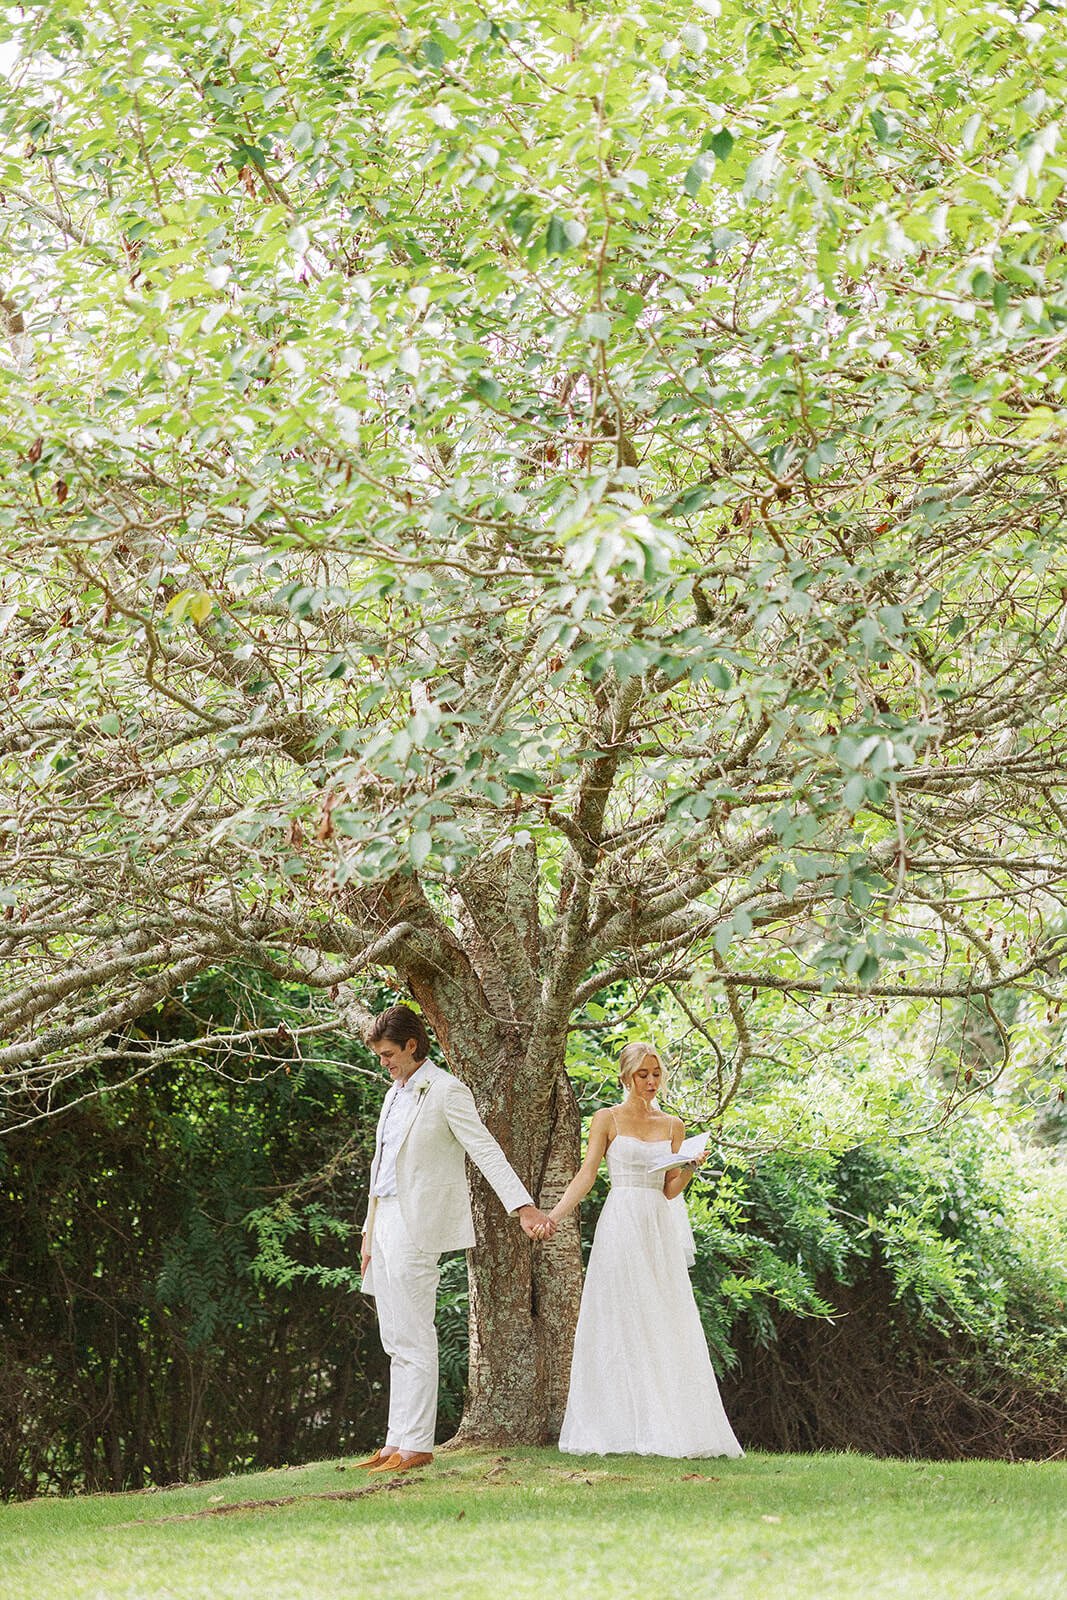 Bride and groom doing a first touch with private vows under a tree